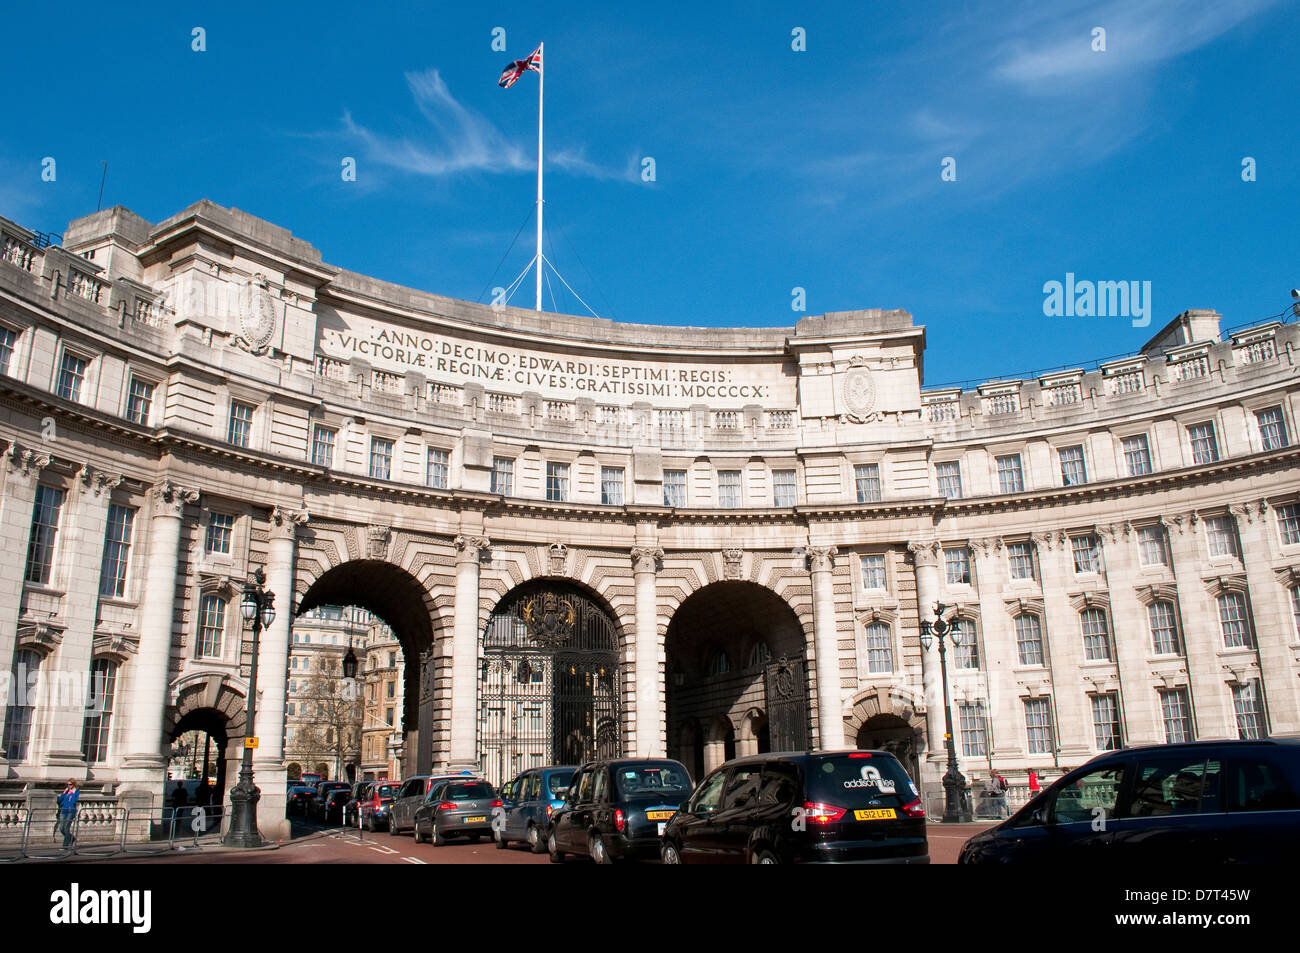 L'Admiralty Arch, London, UK Banque D'Images